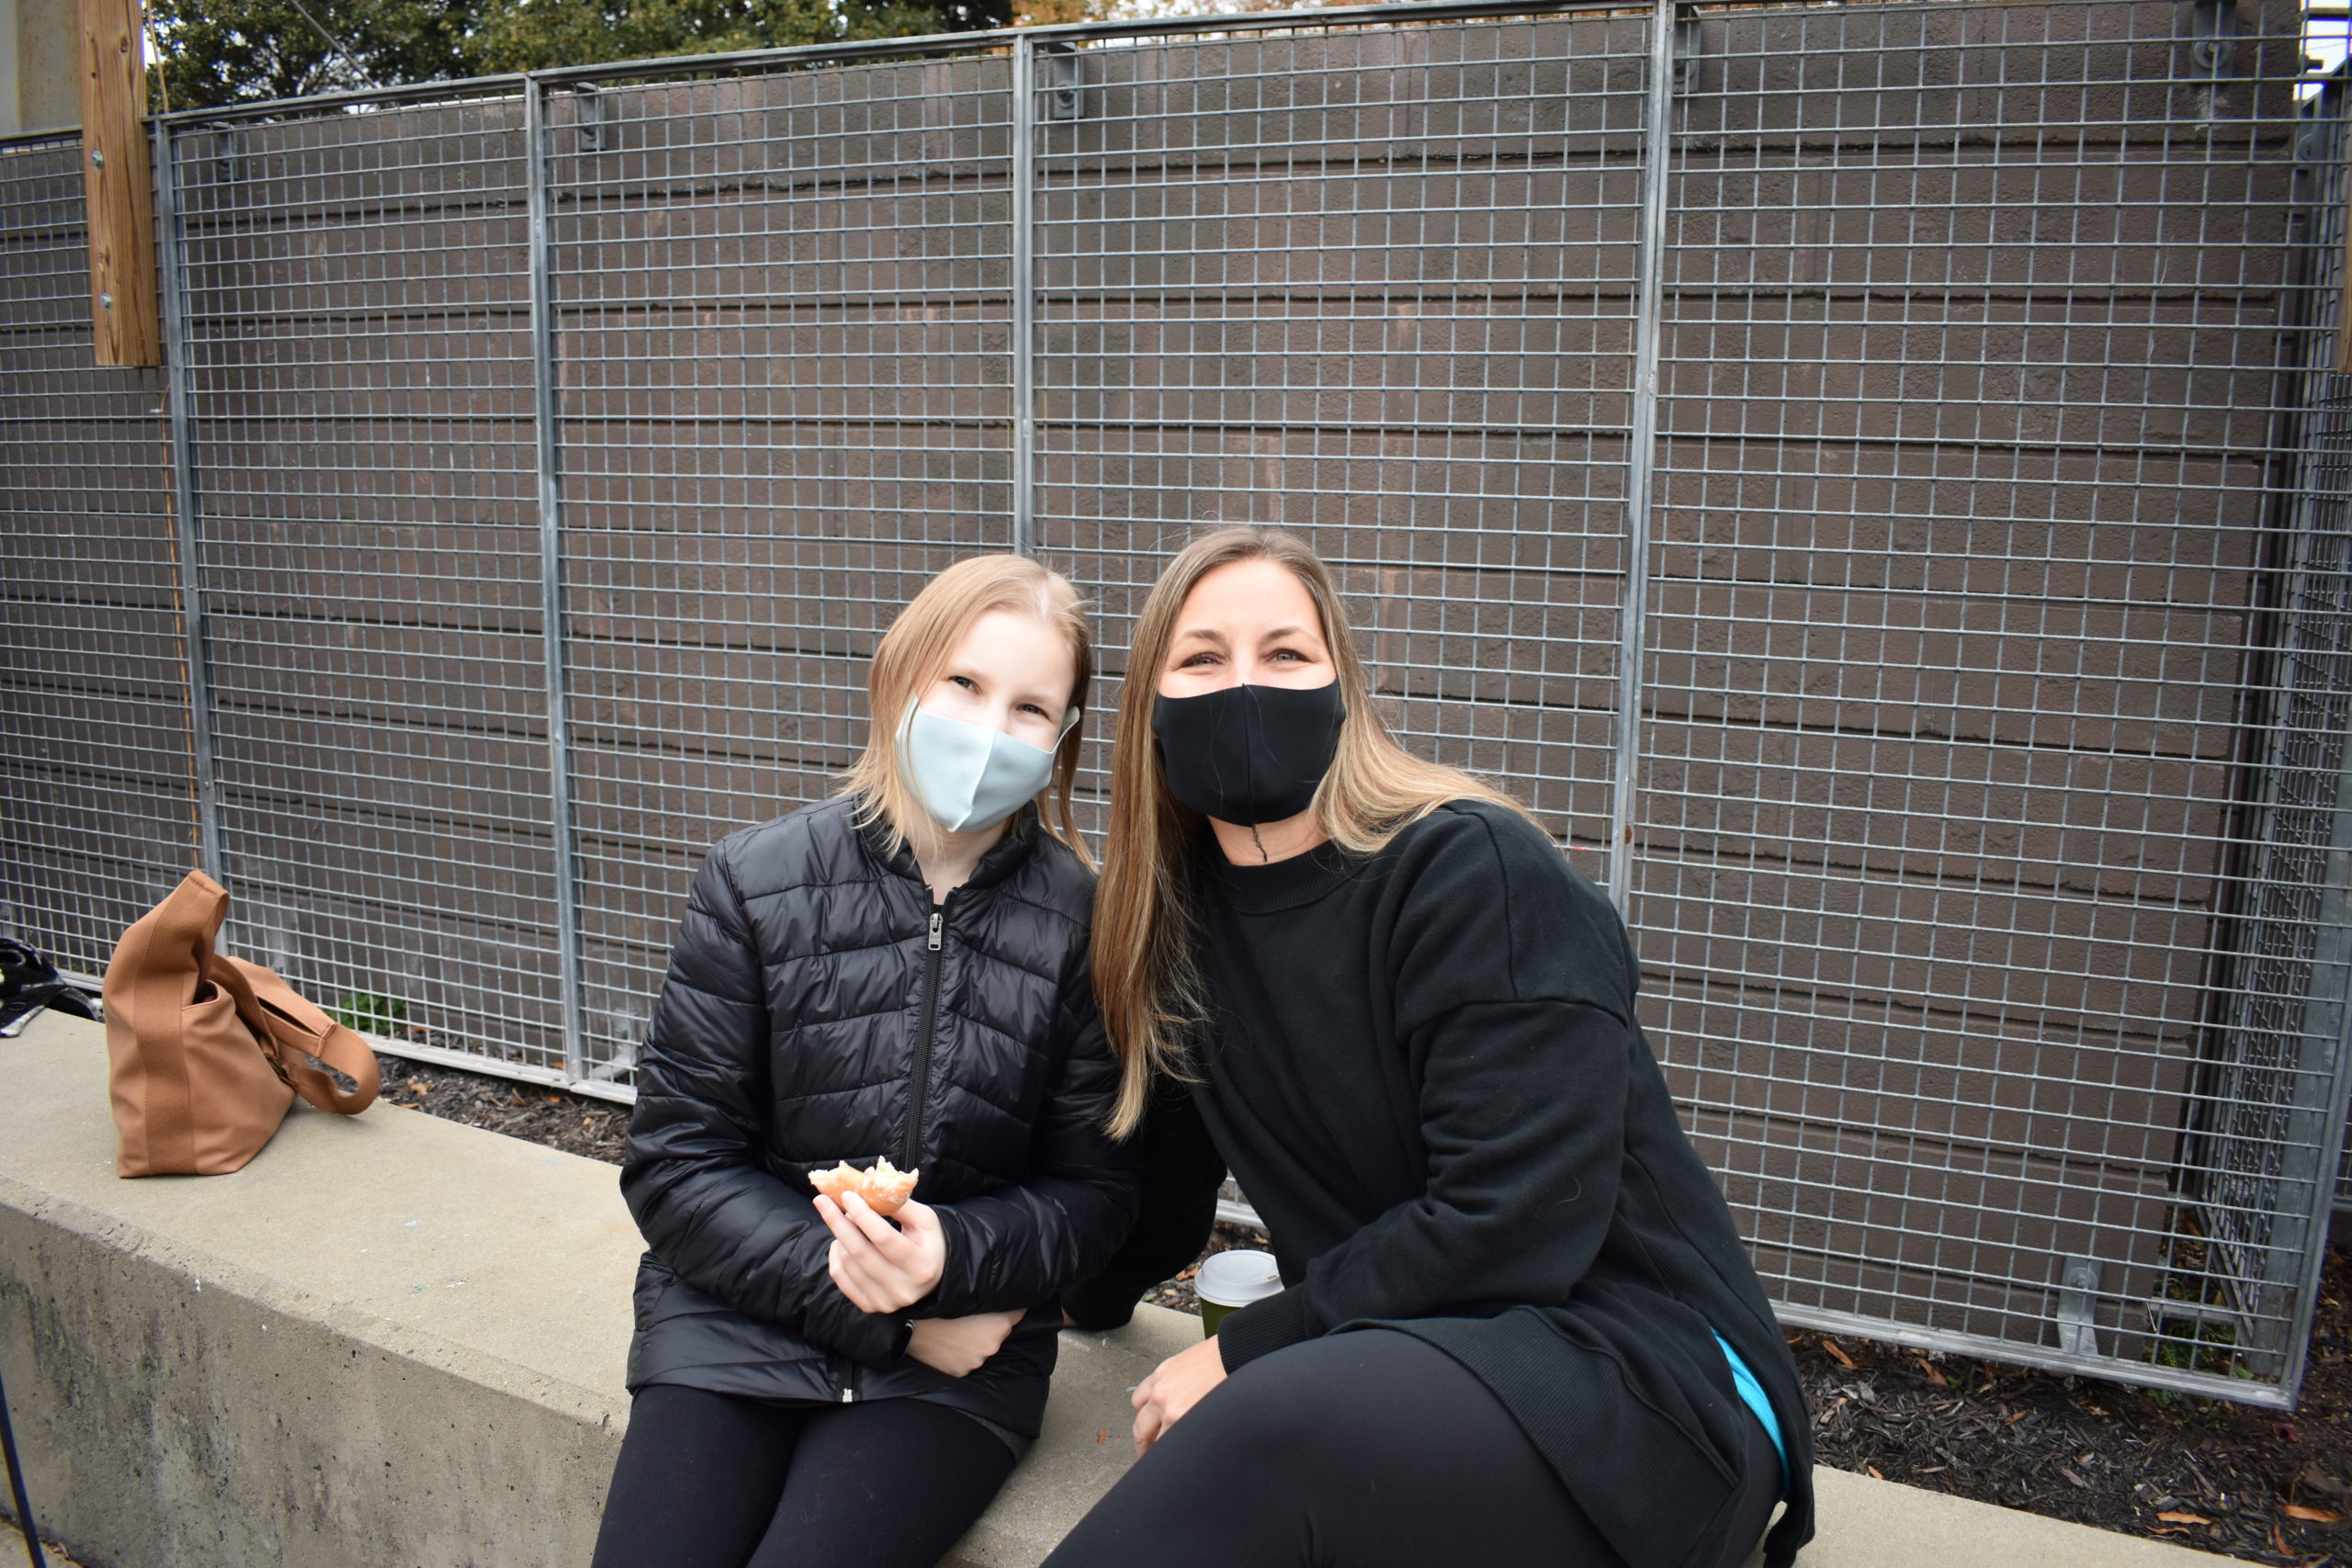 A teenager and her mom wearing cloth masks and sitting in an outdoor courtyard